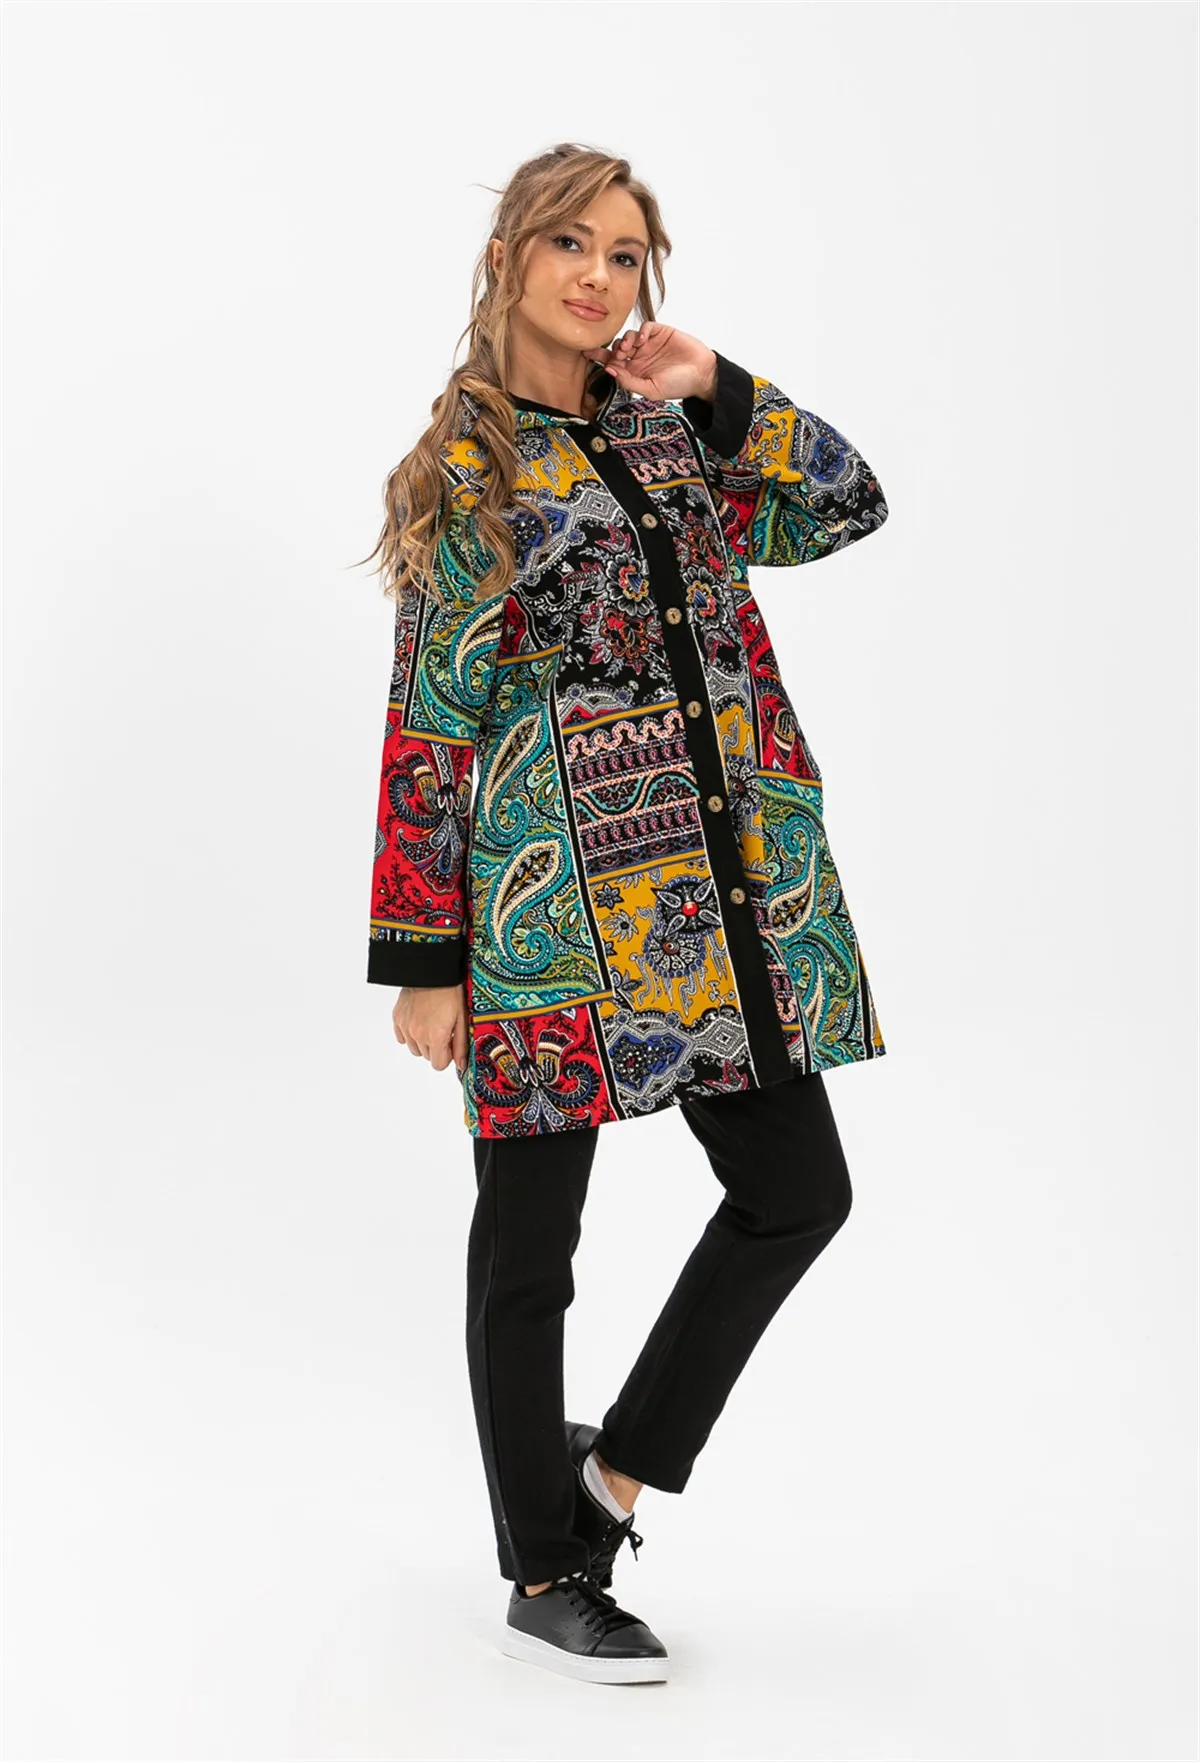 Handmade Flannel Fabric Paisley Patterned Winter Multicolor Hooded Women's Jacket 2022 New Fashion Outwear